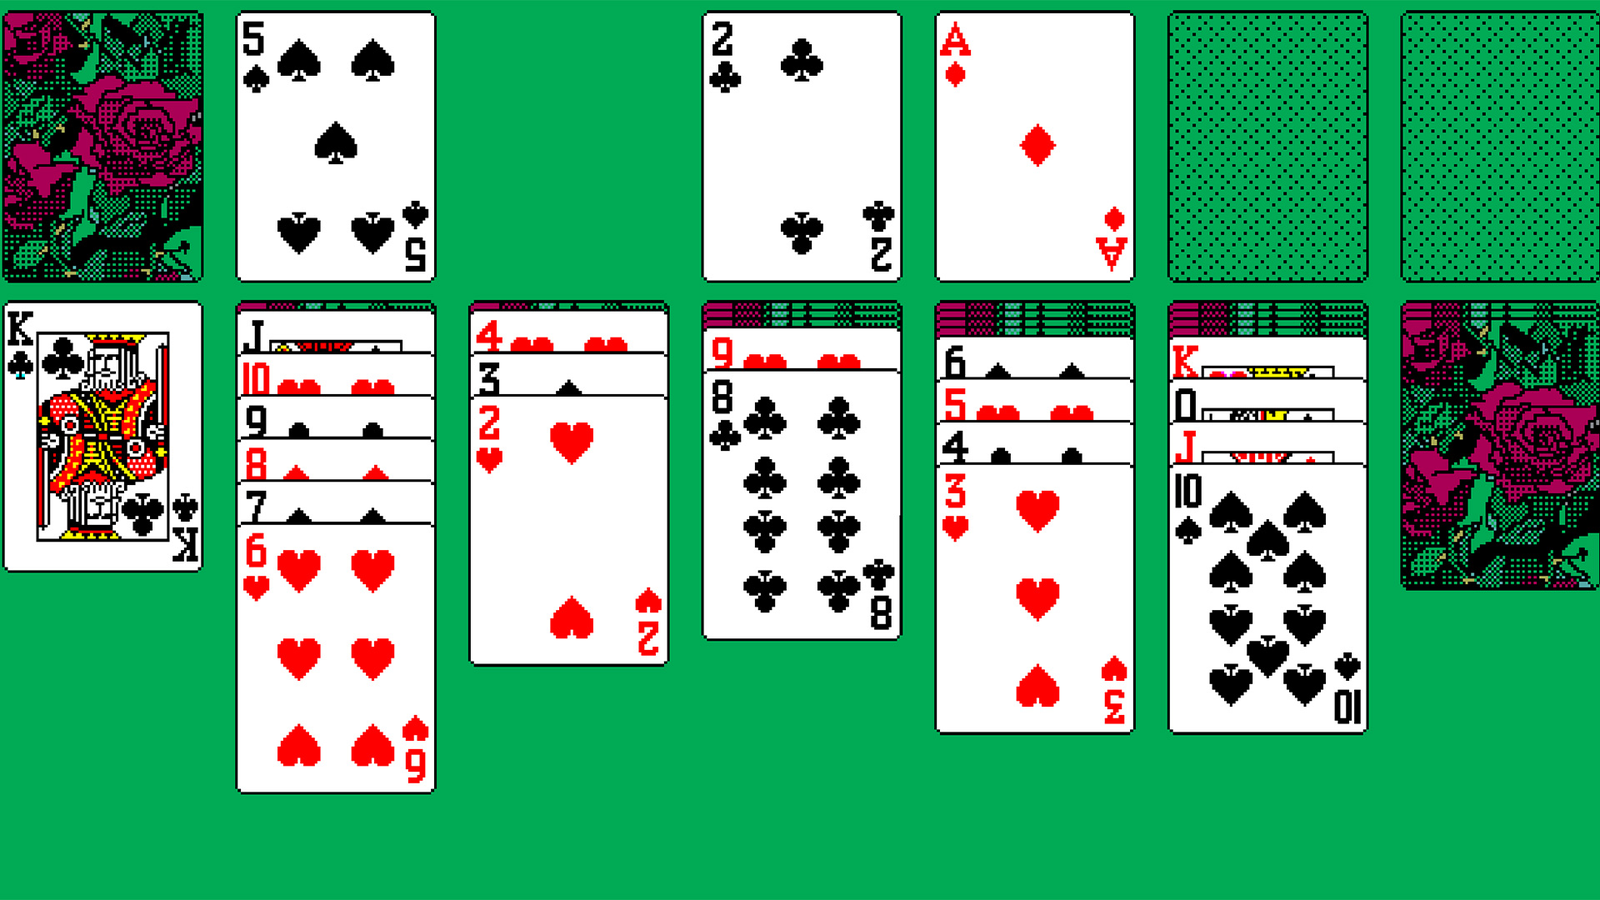 100+] Microsoft Solitaire Wallpapers